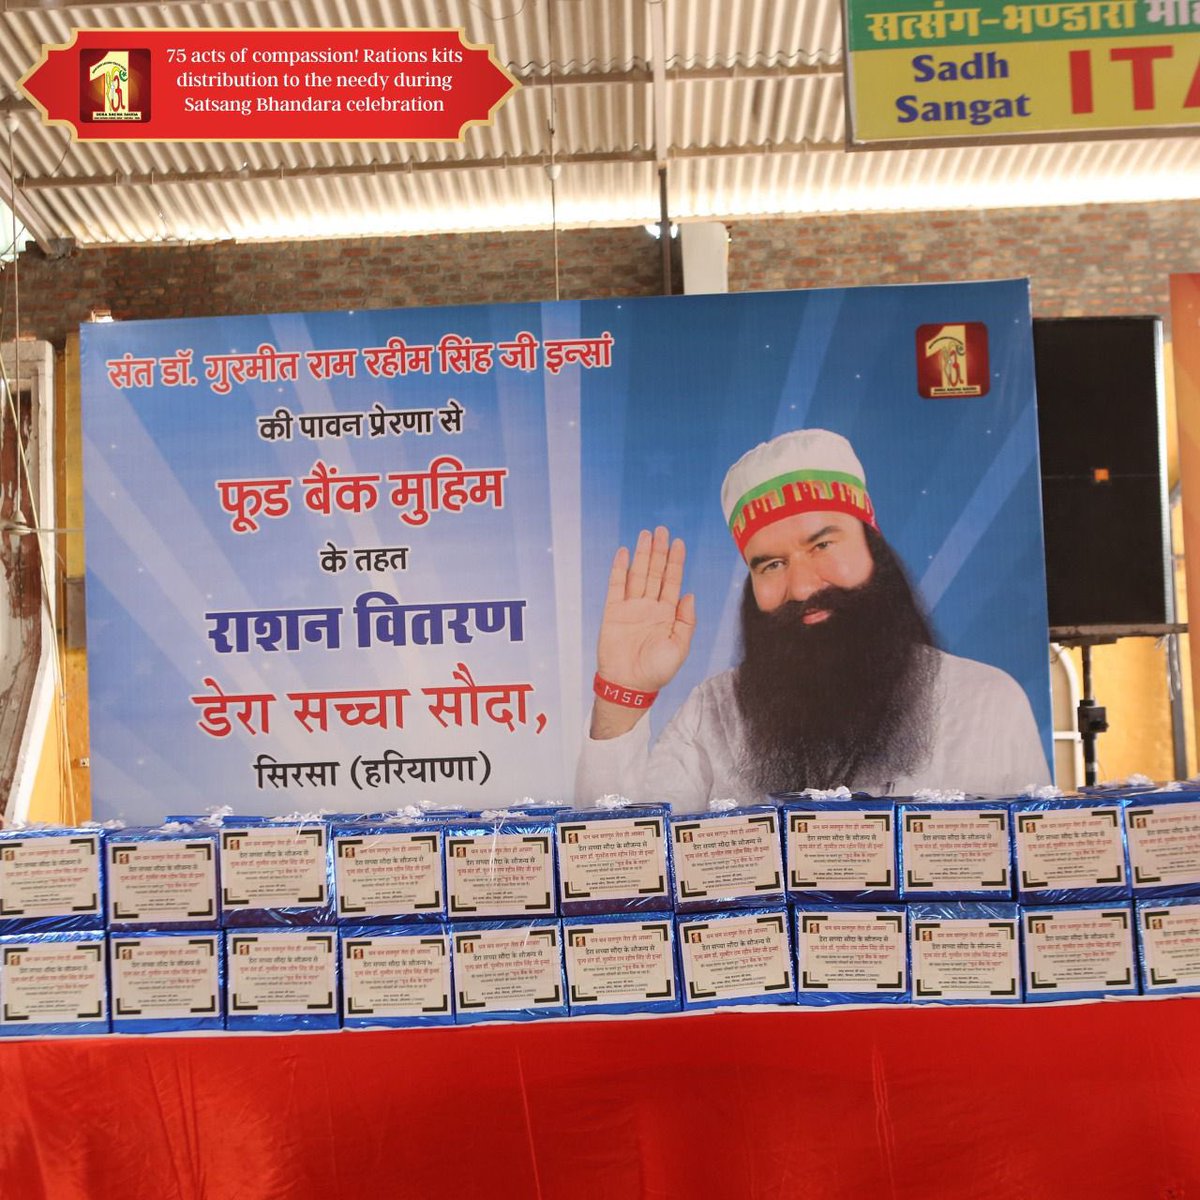 To end up the issue of starvation, Dera Sacha Sauda has taken the initiative of ‘Food Bank’, it is a place where people donate food & needy ones get that food. They have established many cloth banks, food banks etc. with the inspiration of Saint Gurmeet Ram Rahim Ji
#FeedTheNeedy